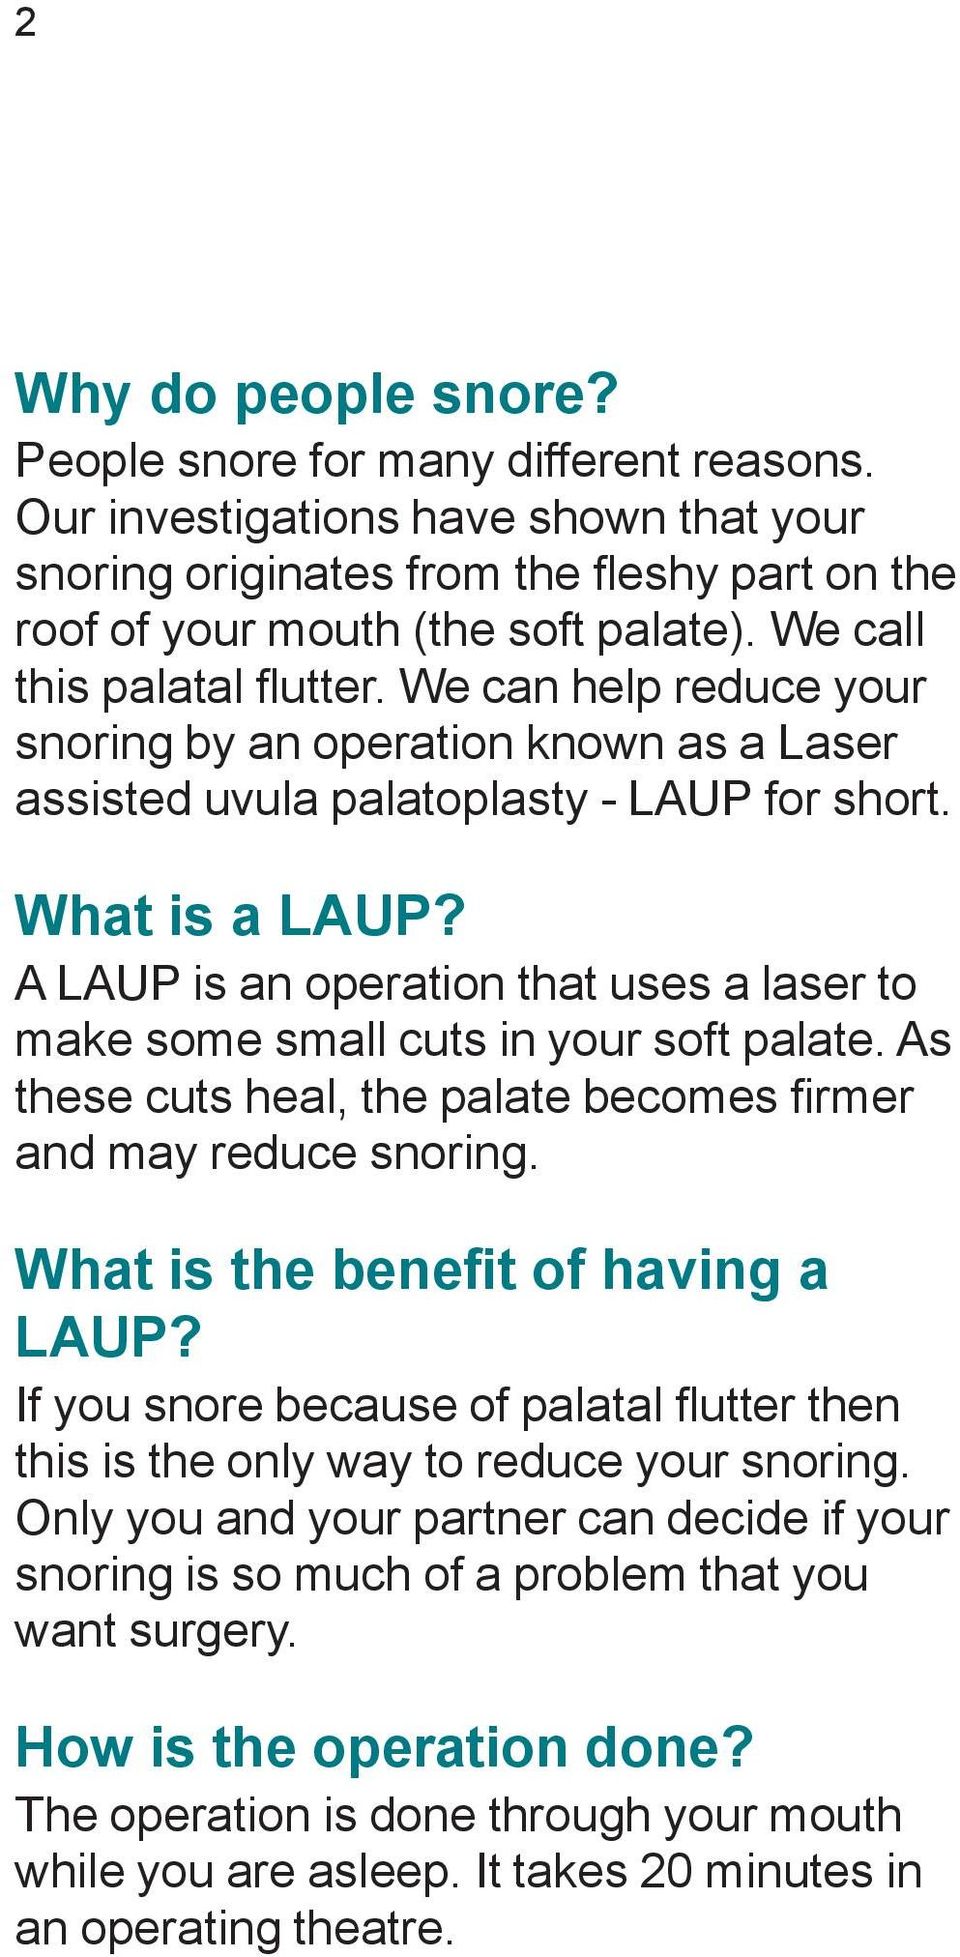 A LAUP is an operation that uses a laser to make some small cuts in your soft palate. As these cuts heal, the palate becomes fi rmer and may reduce snoring. What is the benefit of having a LAUP?